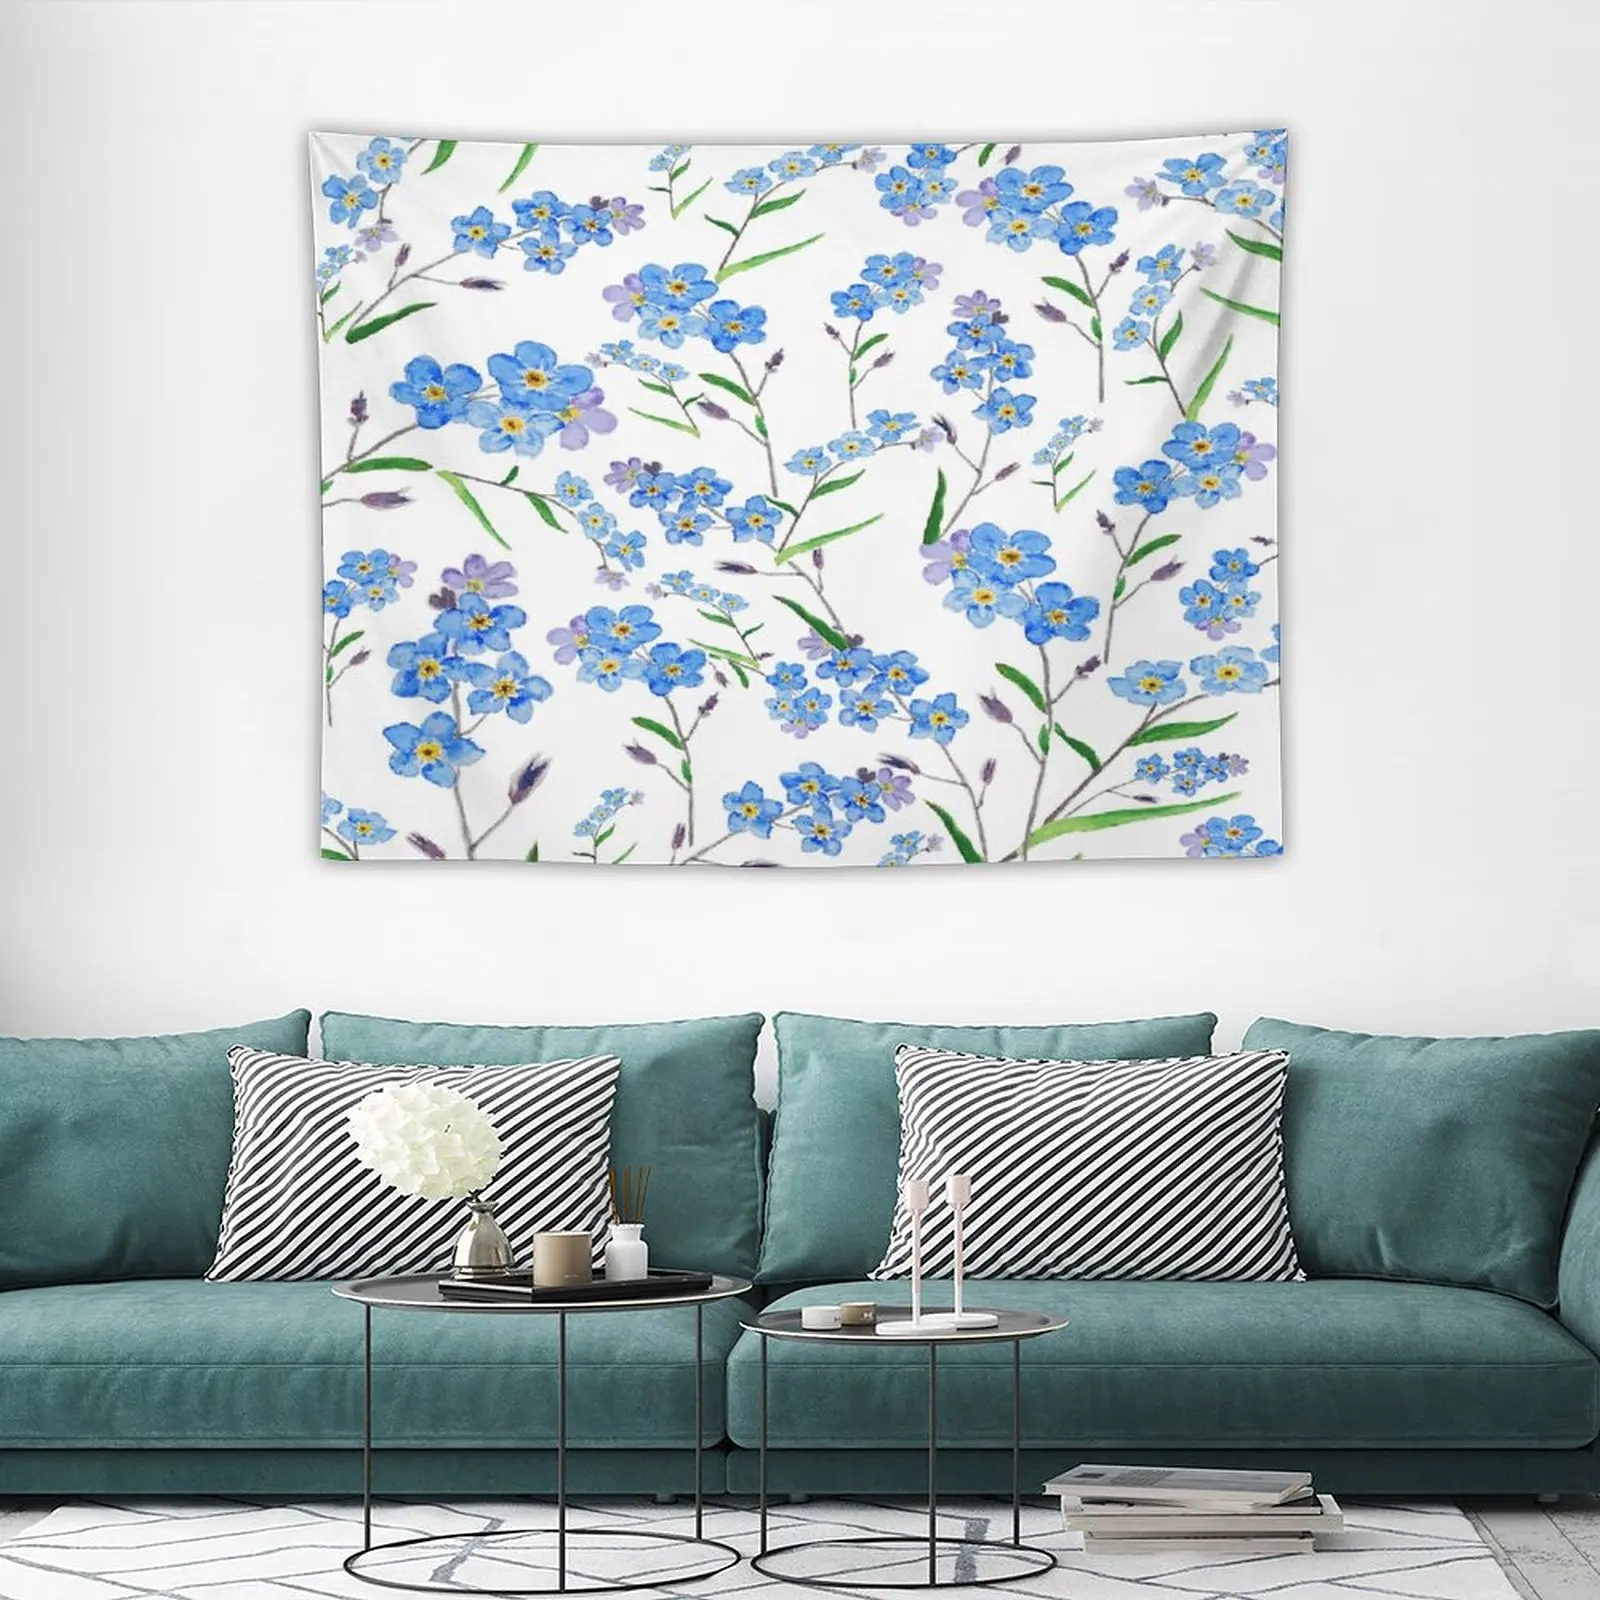 

Egyptian Blue Forget Me Not Pattern Watercolor Tapestry Japanese Room Decor Myth Cloth Ex Tapestry Wall Hanging Decoration Bedro